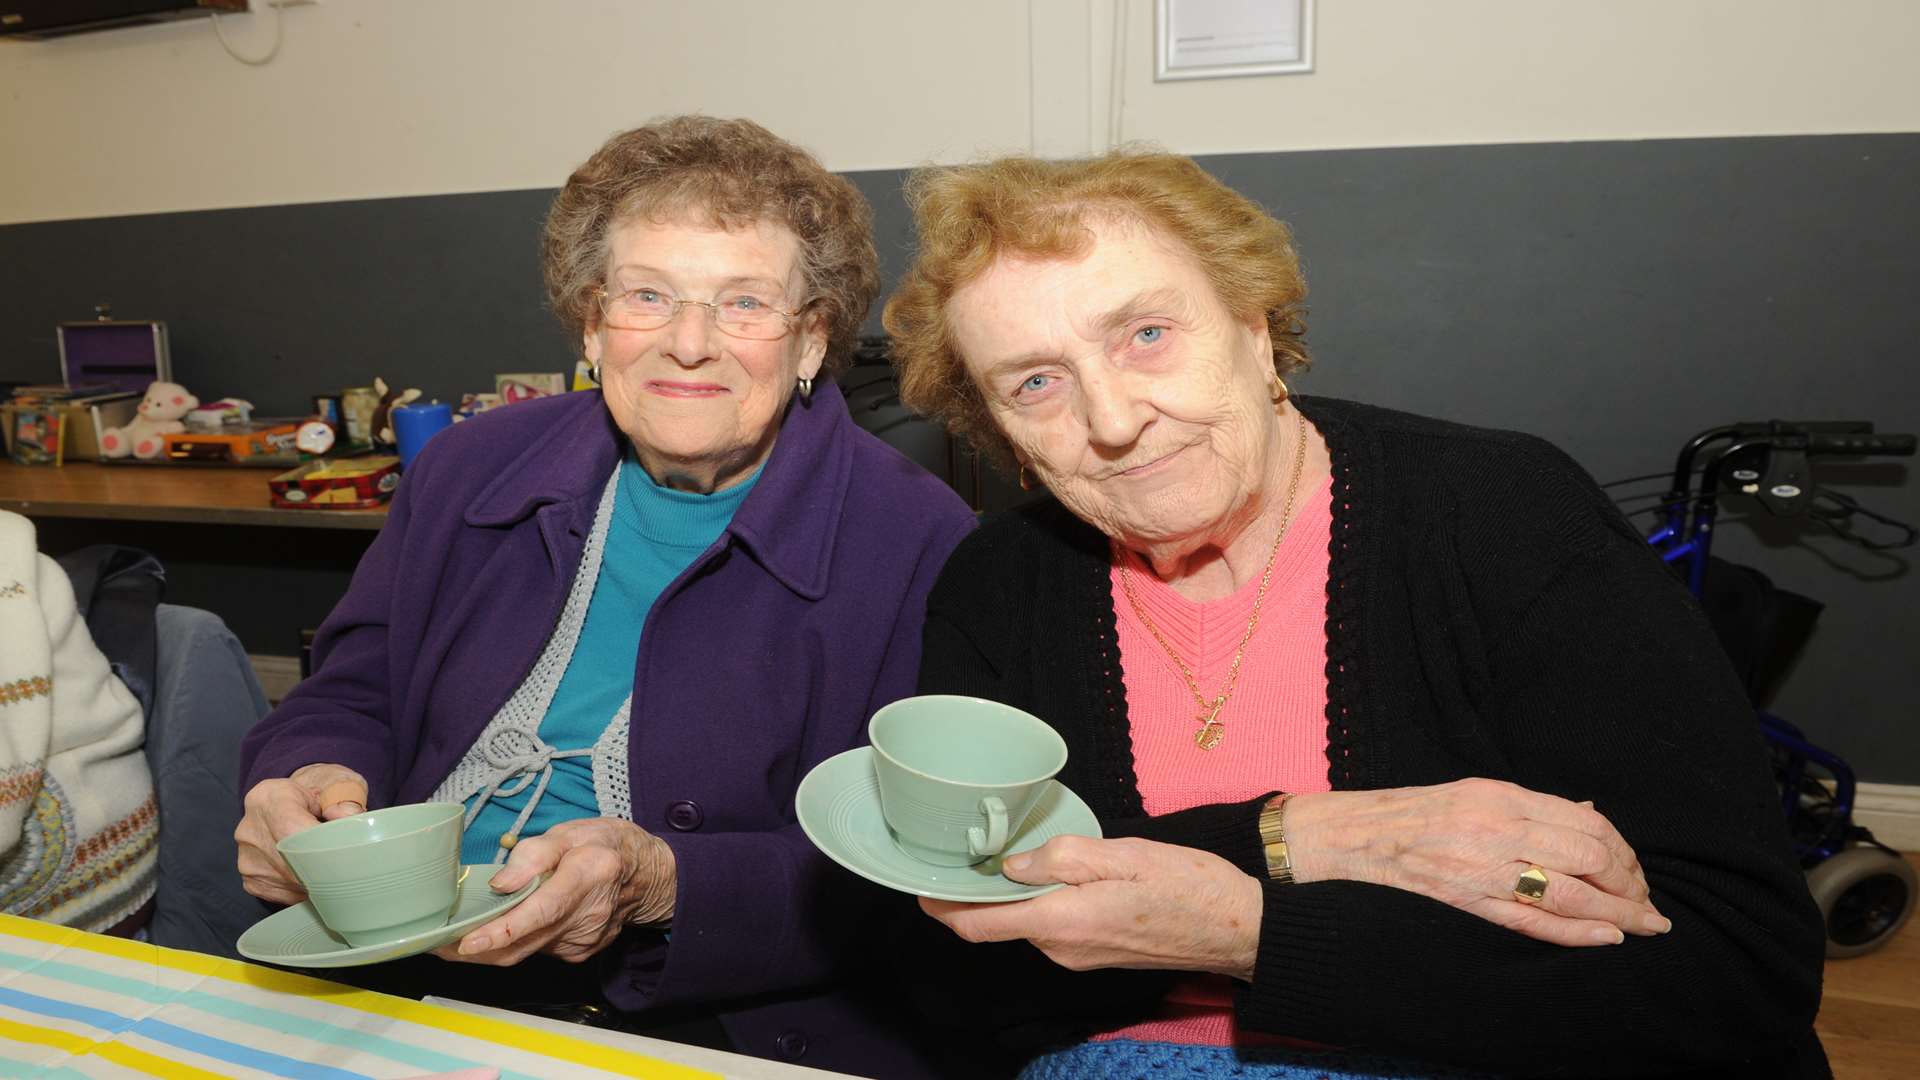 Dartford Associaion for the Disabled 53rd anniversary. L-R: Margaret Woodyard and Norma Kerr